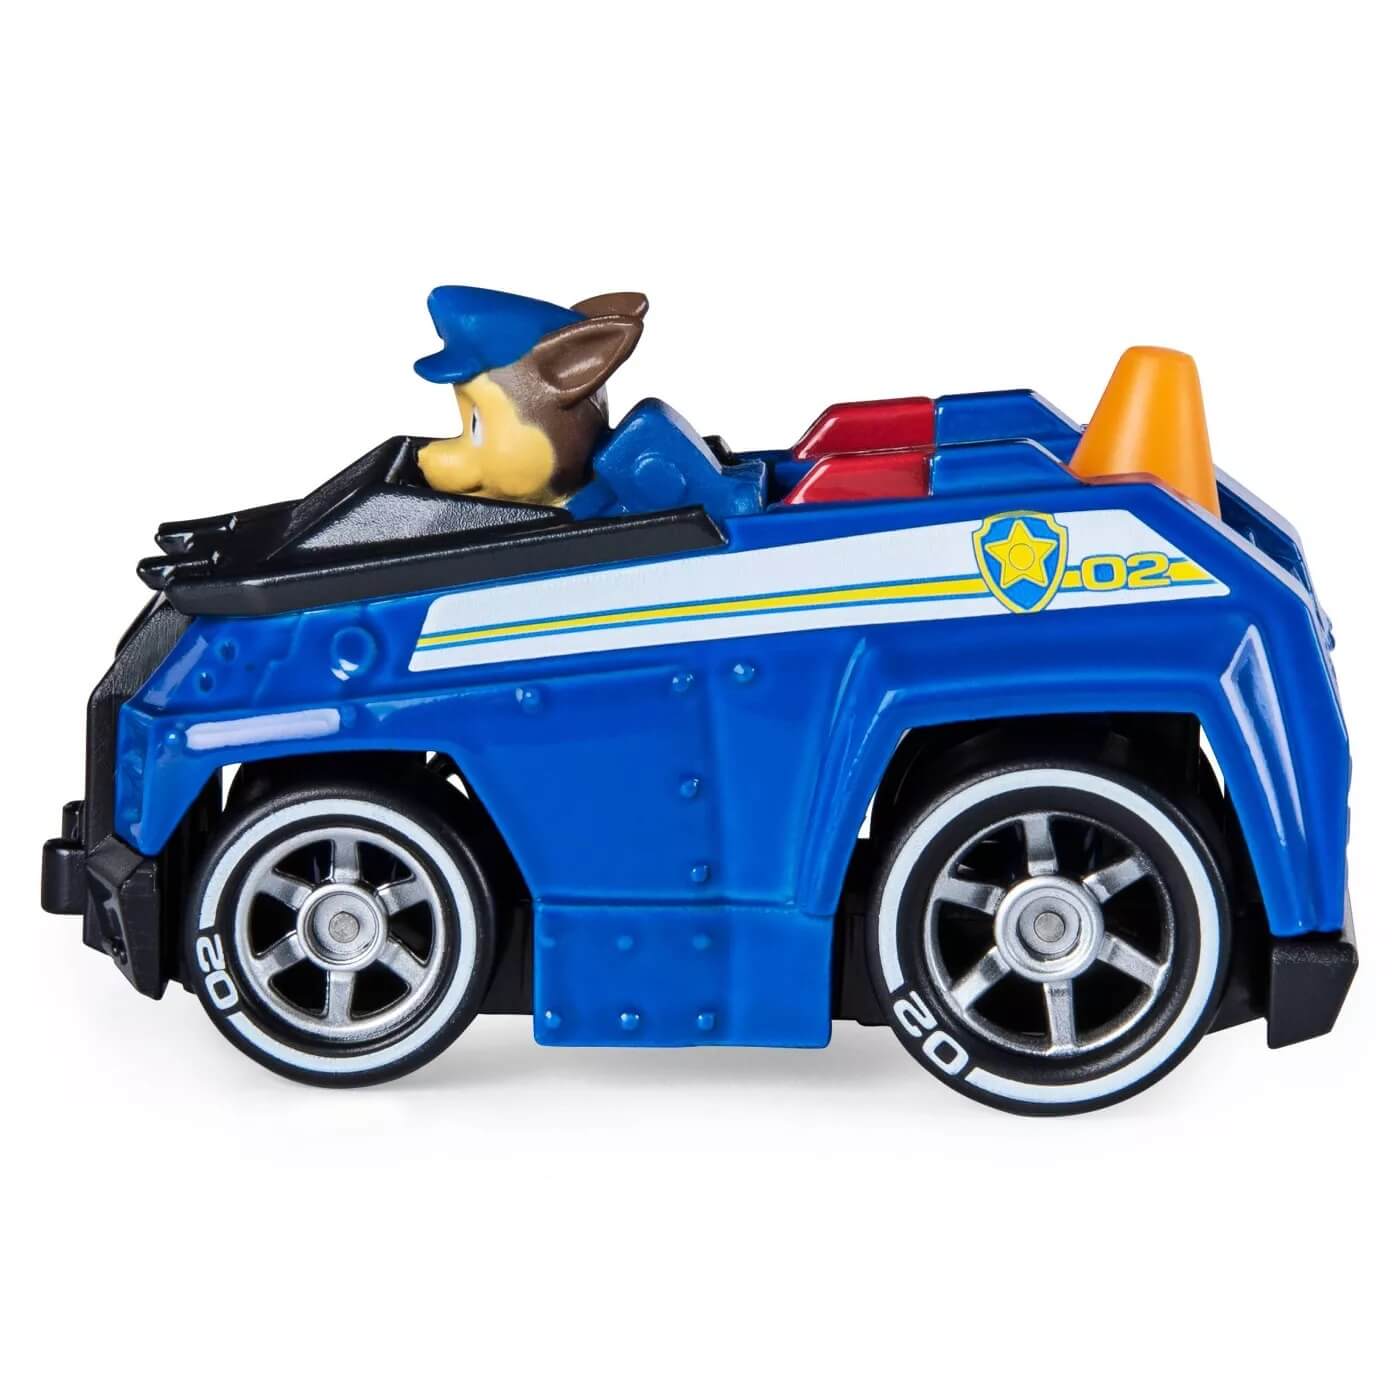 Chase car the paw patrol